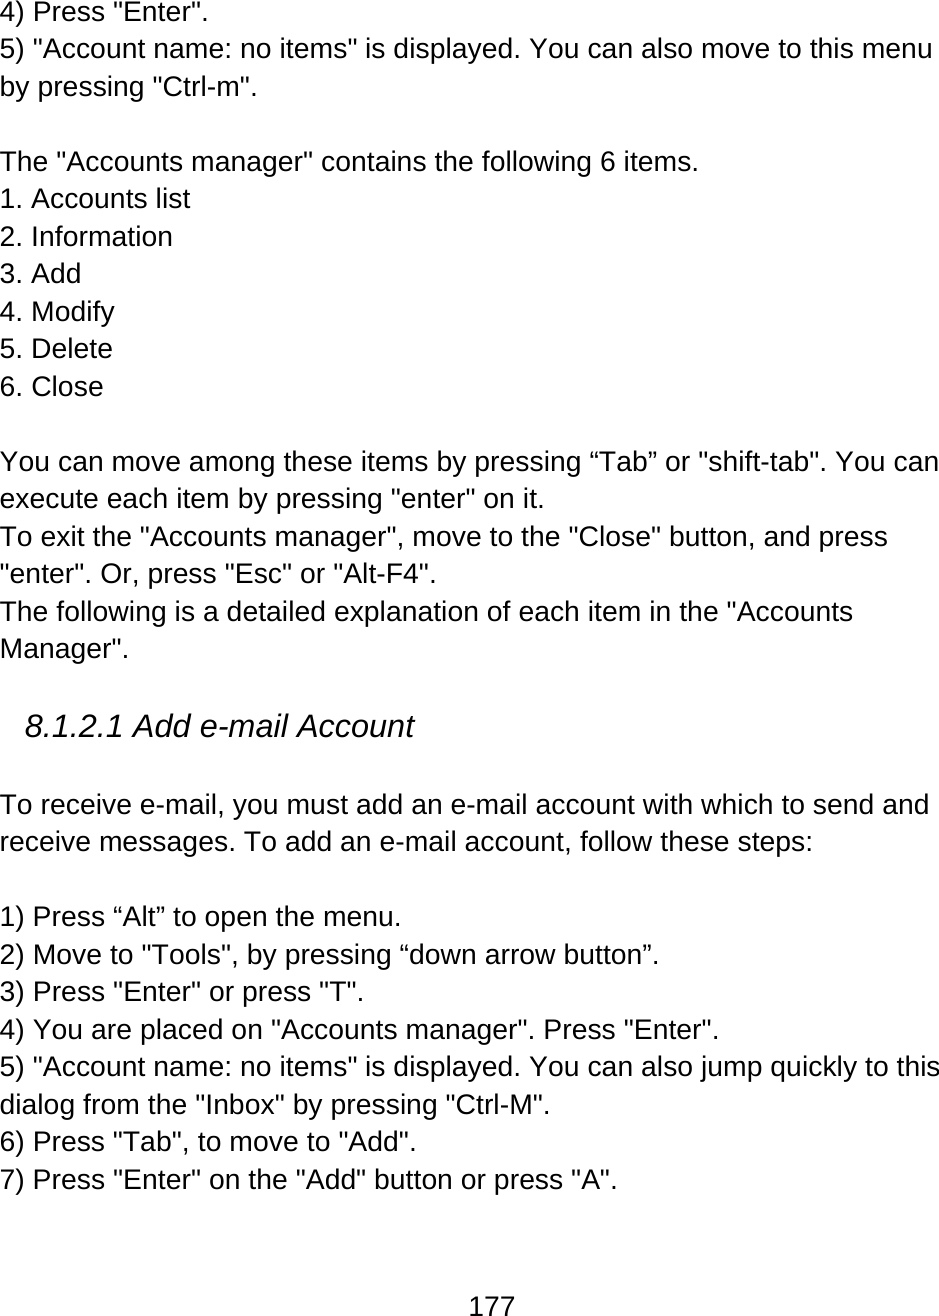 177  4) Press &quot;Enter&quot;. 5) &quot;Account name: no items&quot; is displayed. You can also move to this menu by pressing &quot;Ctrl-m&quot;.  The &quot;Accounts manager&quot; contains the following 6 items. 1. Accounts list 2. Information 3. Add 4. Modify 5. Delete 6. Close  You can move among these items by pressing “Tab” or &quot;shift-tab&quot;. You can execute each item by pressing &quot;enter&quot; on it. To exit the &quot;Accounts manager&quot;, move to the &quot;Close&quot; button, and press &quot;enter&quot;. Or, press &quot;Esc&quot; or &quot;Alt-F4&quot;.  The following is a detailed explanation of each item in the &quot;Accounts Manager&quot;.  8.1.2.1 Add e-mail Account  To receive e-mail, you must add an e-mail account with which to send and receive messages. To add an e-mail account, follow these steps:  1) Press “Alt” to open the menu. 2) Move to &quot;Tools&quot;, by pressing “down arrow button”. 3) Press &quot;Enter&quot; or press &quot;T&quot;. 4) You are placed on &quot;Accounts manager&quot;. Press &quot;Enter&quot;. 5) &quot;Account name: no items&quot; is displayed. You can also jump quickly to this dialog from the &quot;Inbox&quot; by pressing &quot;Ctrl-M&quot;. 6) Press &quot;Tab&quot;, to move to &quot;Add&quot;. 7) Press &quot;Enter&quot; on the &quot;Add&quot; button or press &quot;A&quot;. 